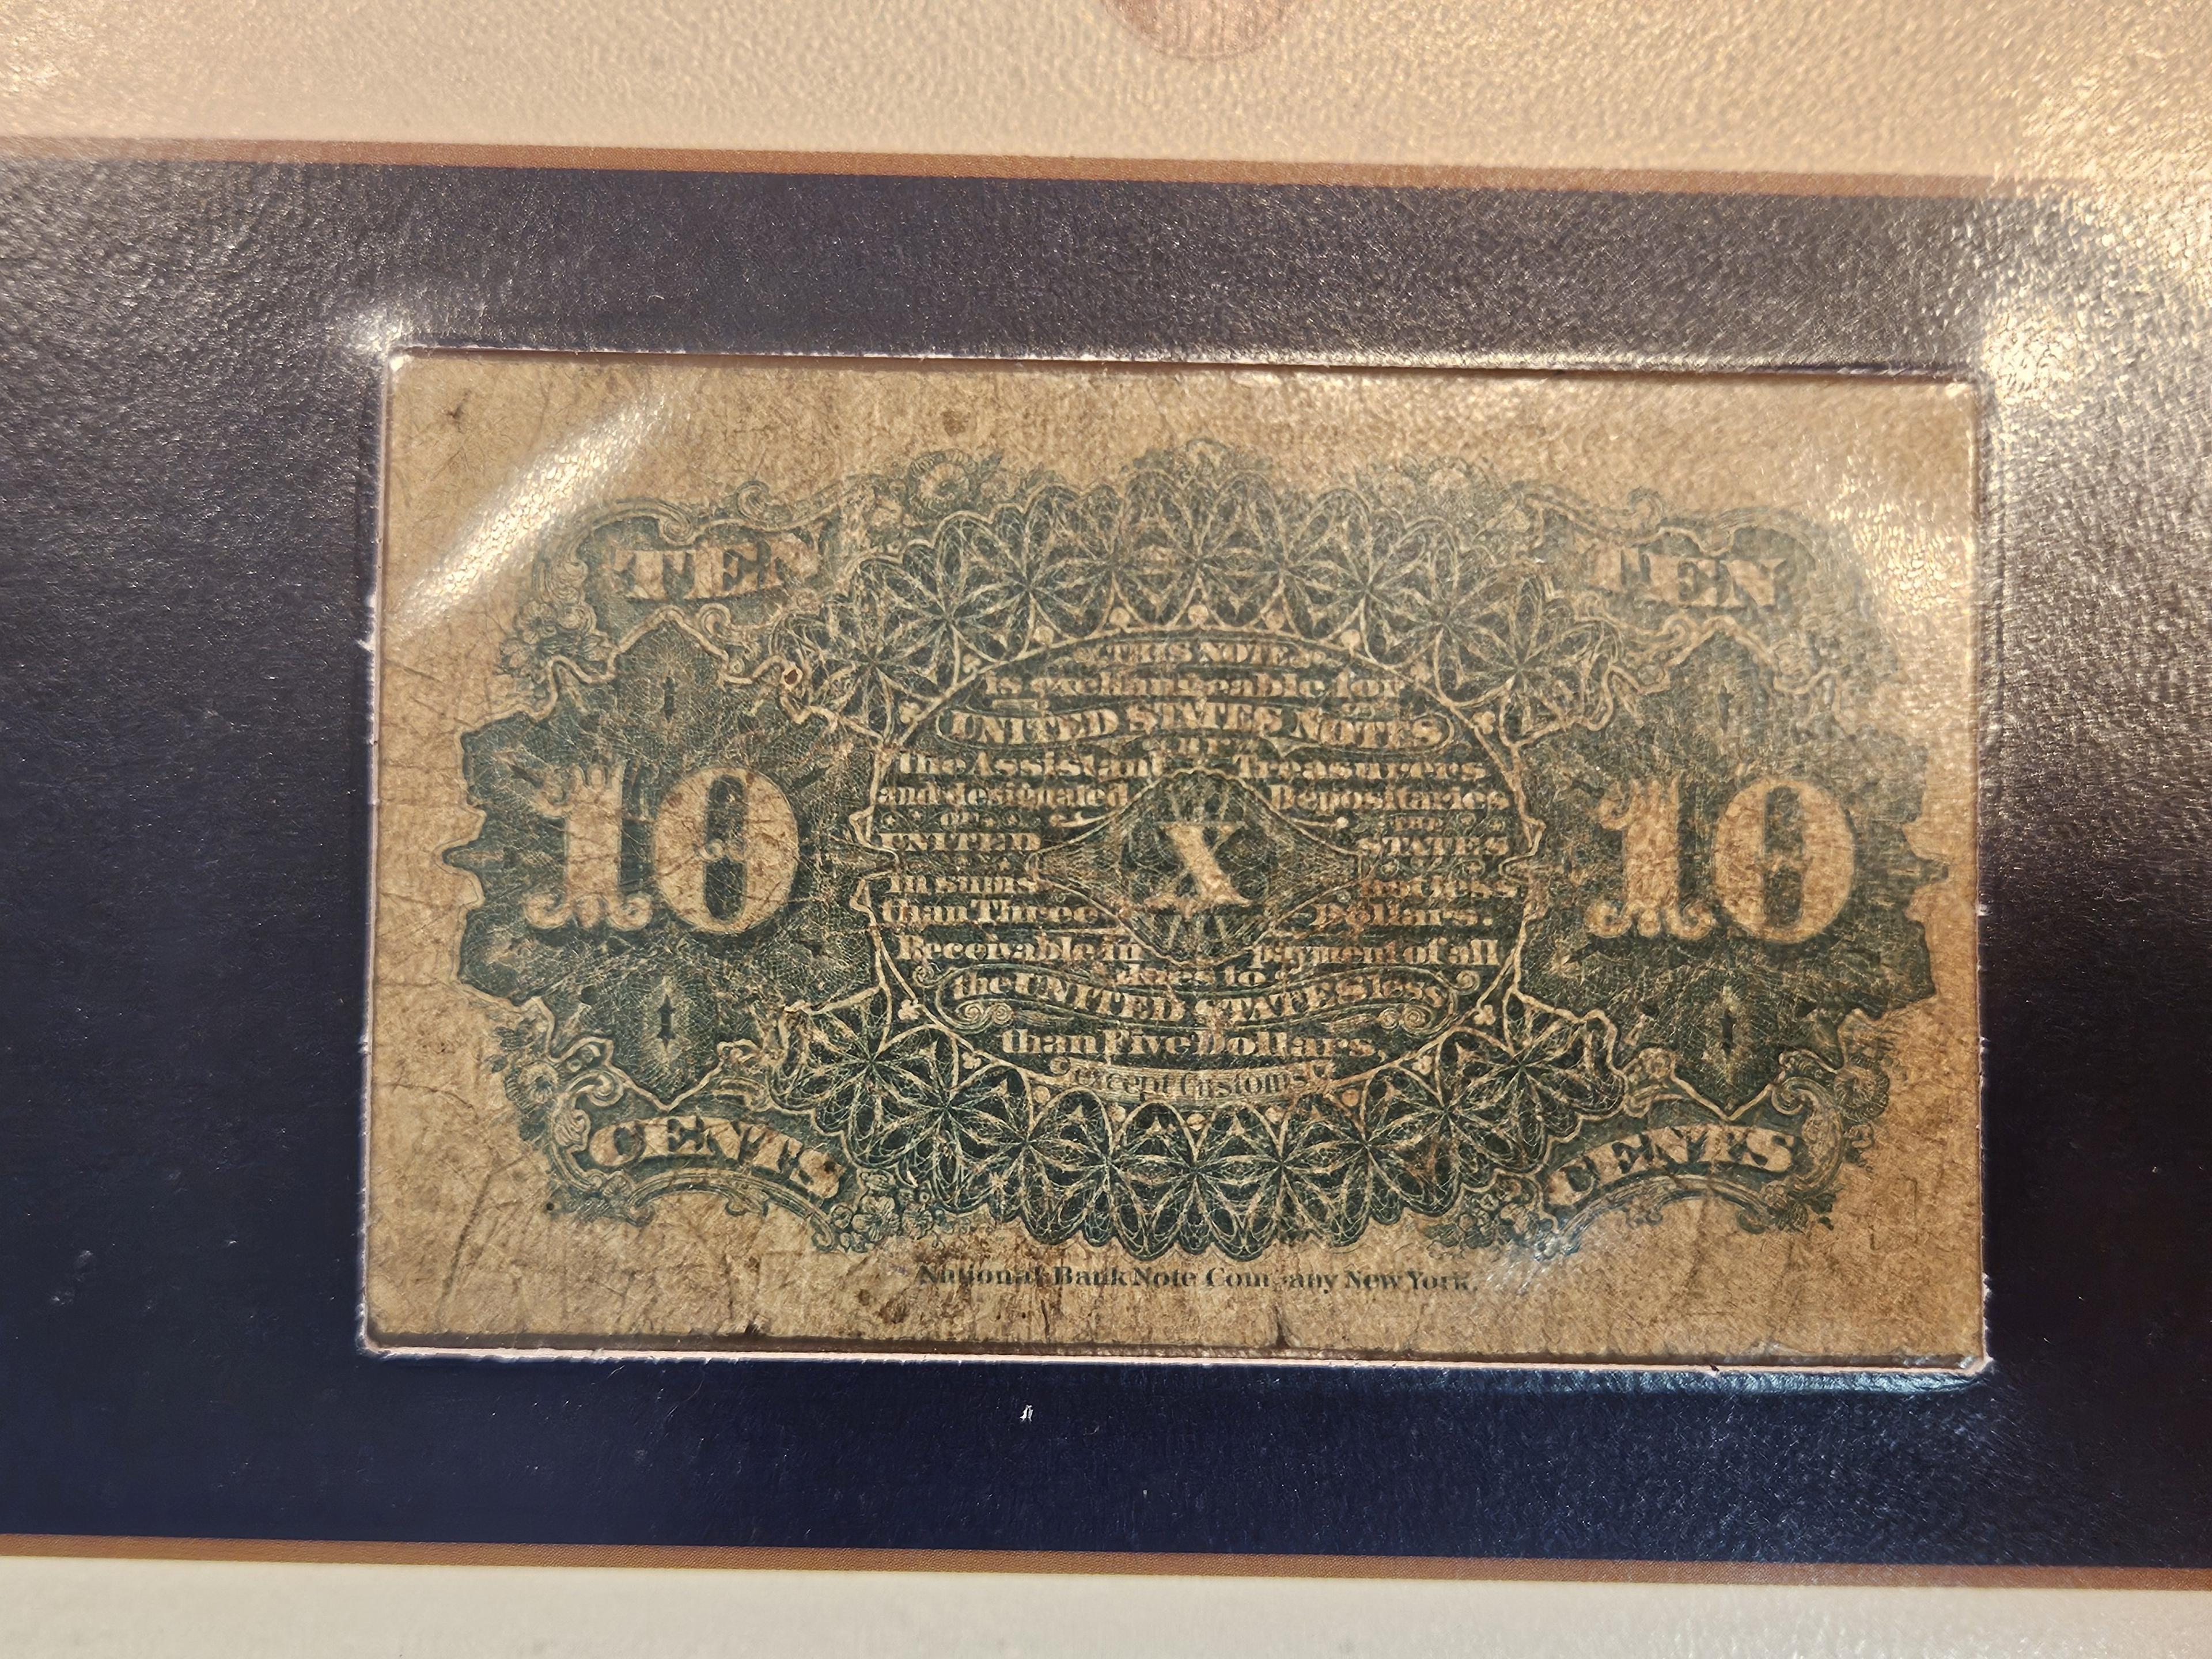 Ten Cent Fractional Currency Note